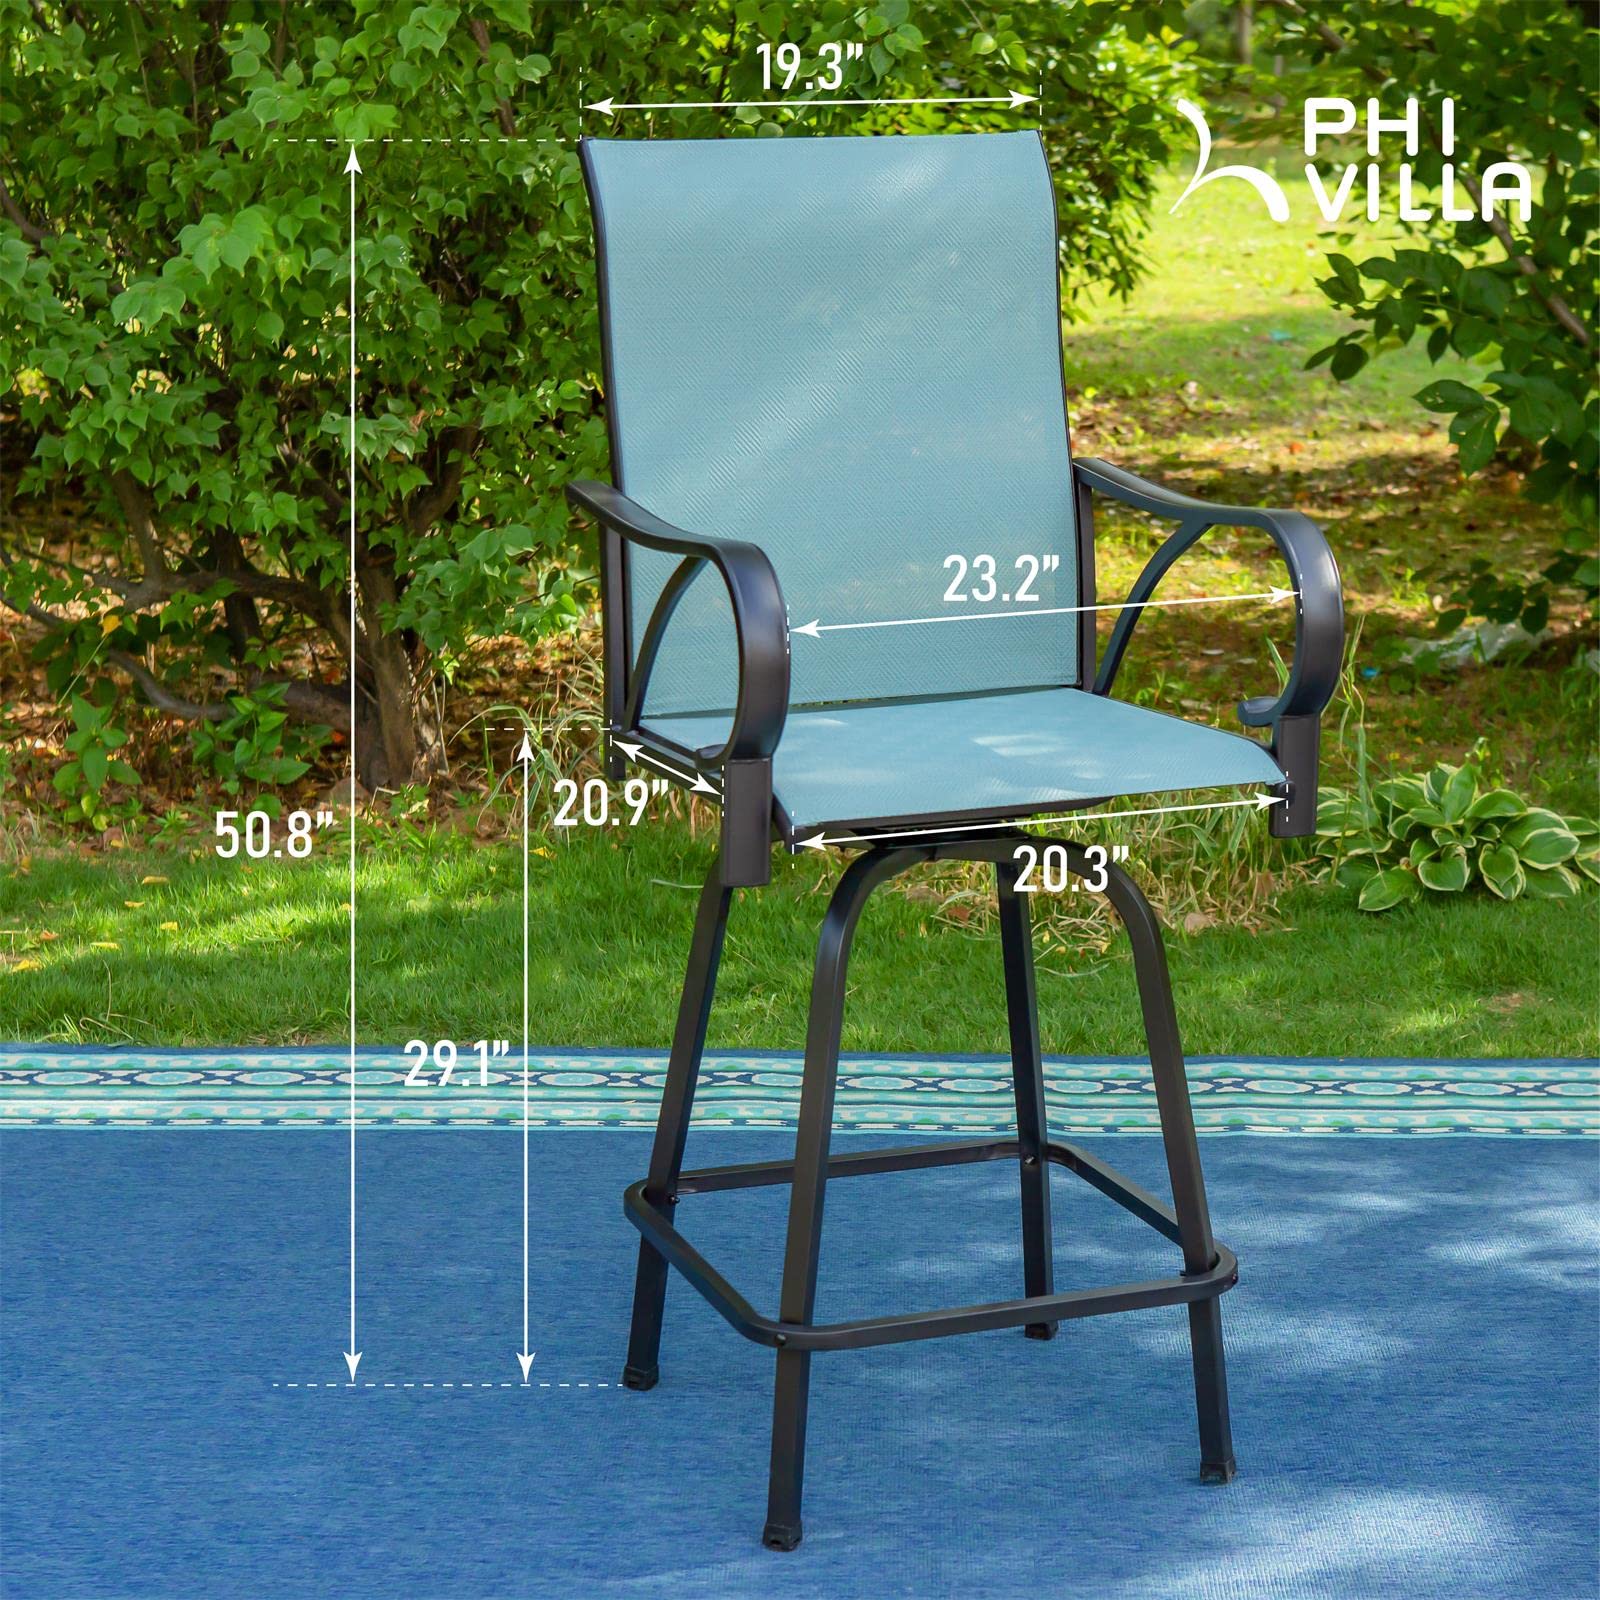 PHI VILLA Patio Outdoor Bar Stool Swivel Chairs, Outdoor Bar Height Patio Chairs with Back, All-Weather Textilene Fabric Bar Furniture for Garden, Waterproof and Quick-Drying, Set of 6